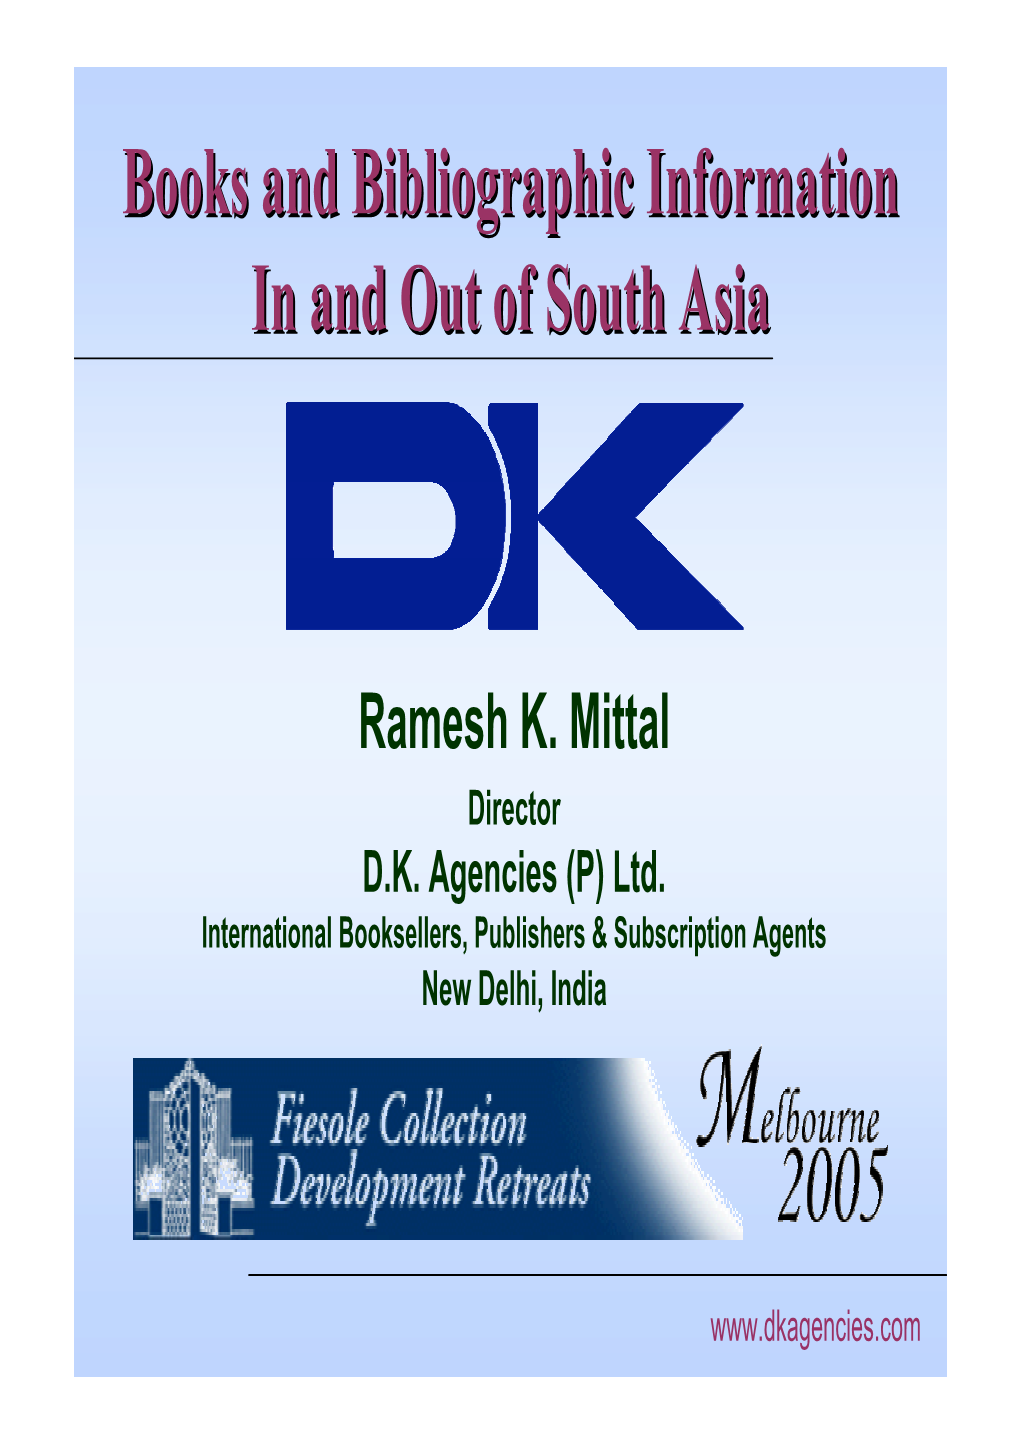 Books and Bibliographic Information in and out of South Asia